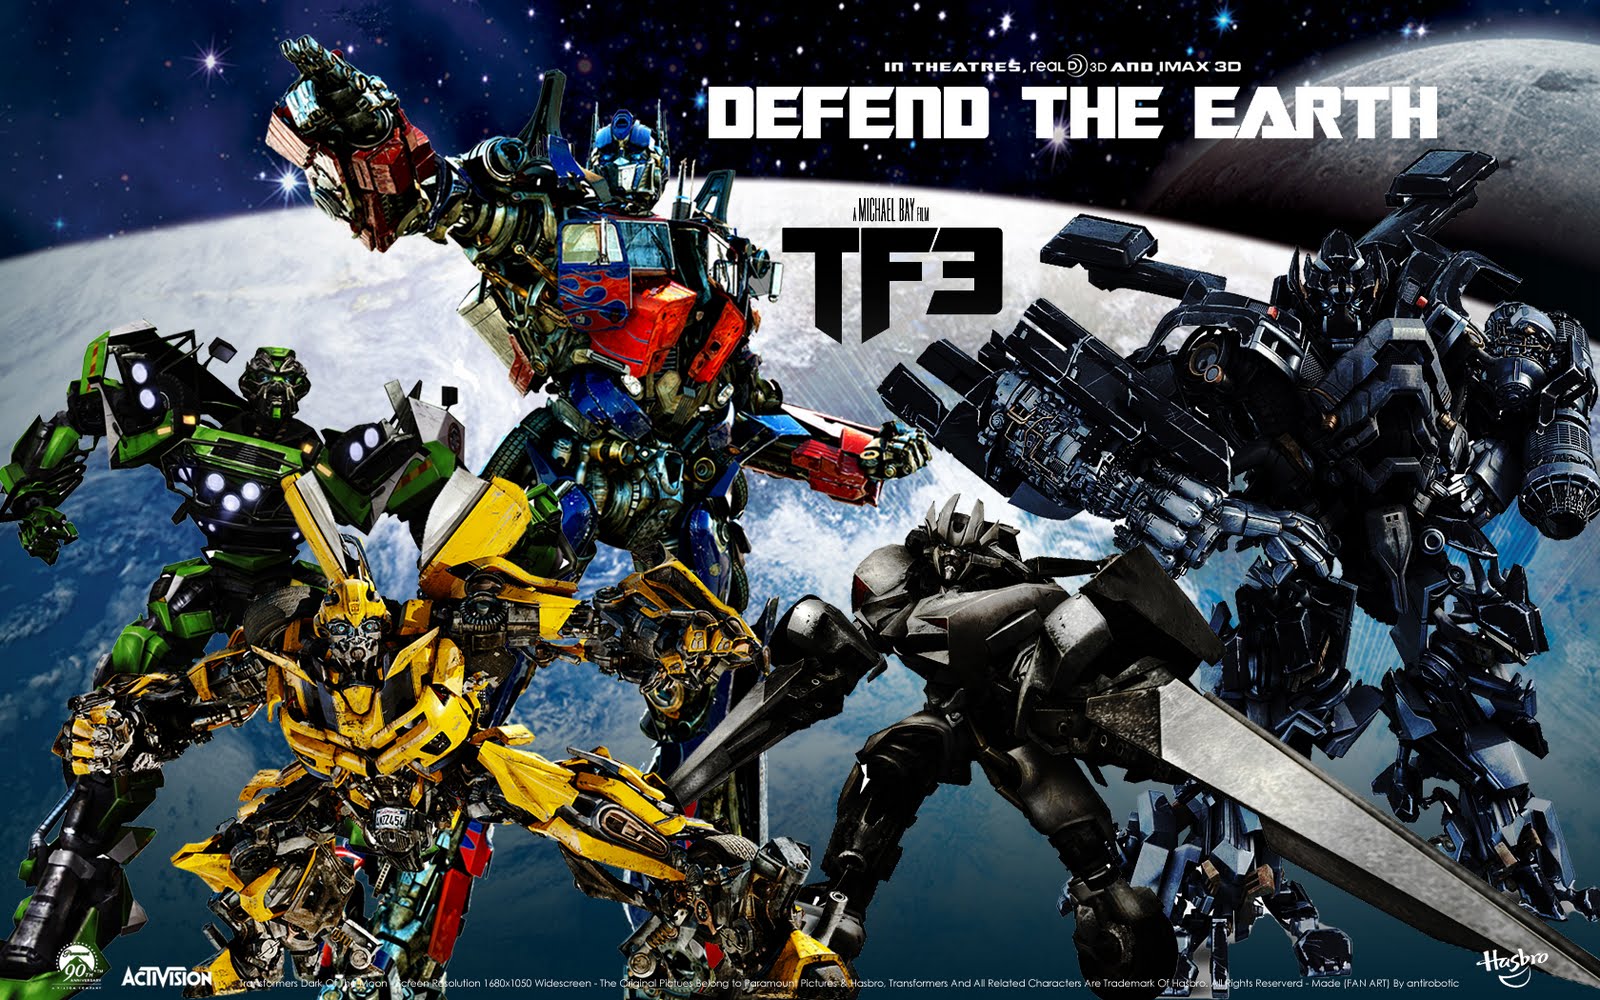 Transformers: Dark Of The Moon Pics, Movie Collection